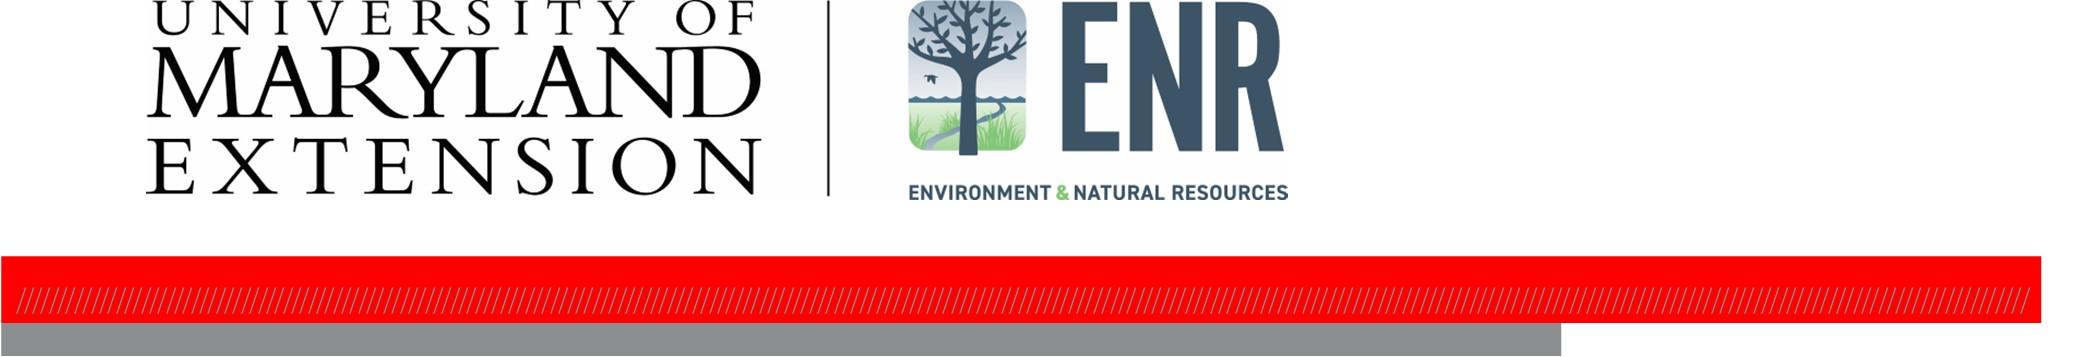 A publication header for University of Maryland Extension and Environment and Natural Resources